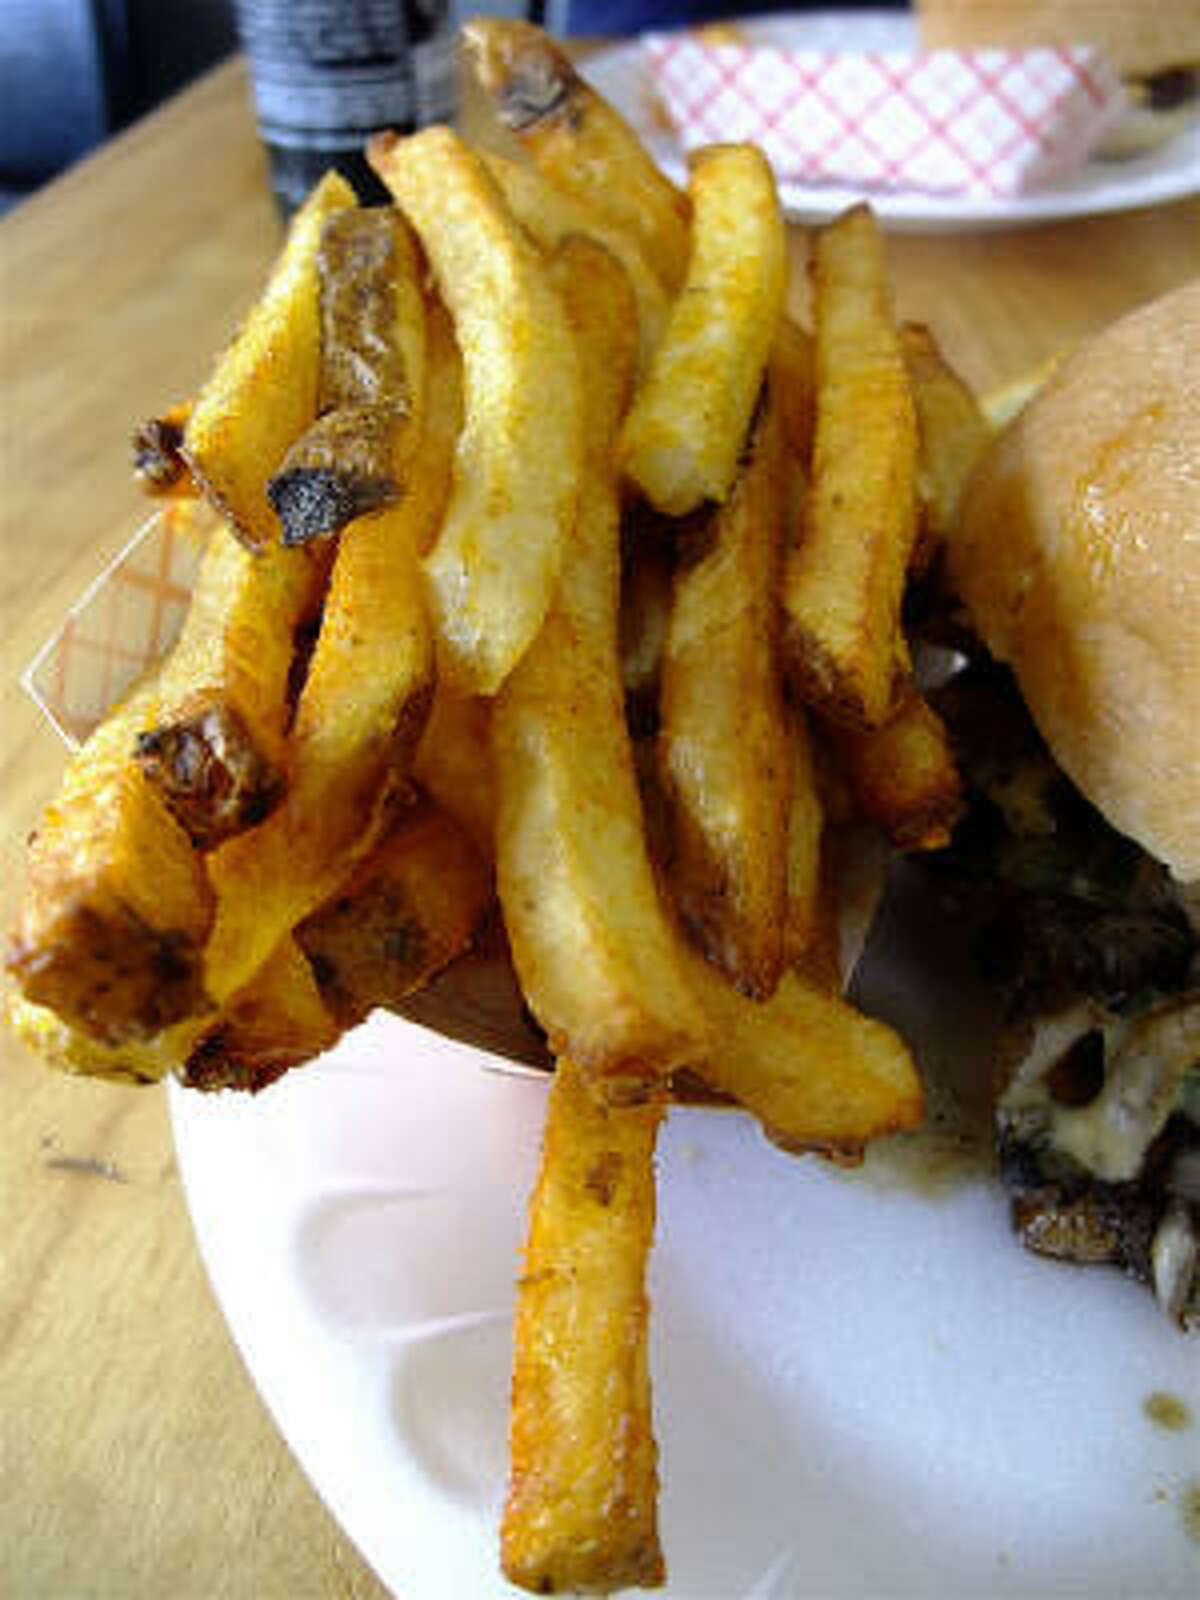 Fresh-cut, double-fried French fries are a prime attraction at Hubcap Grill.